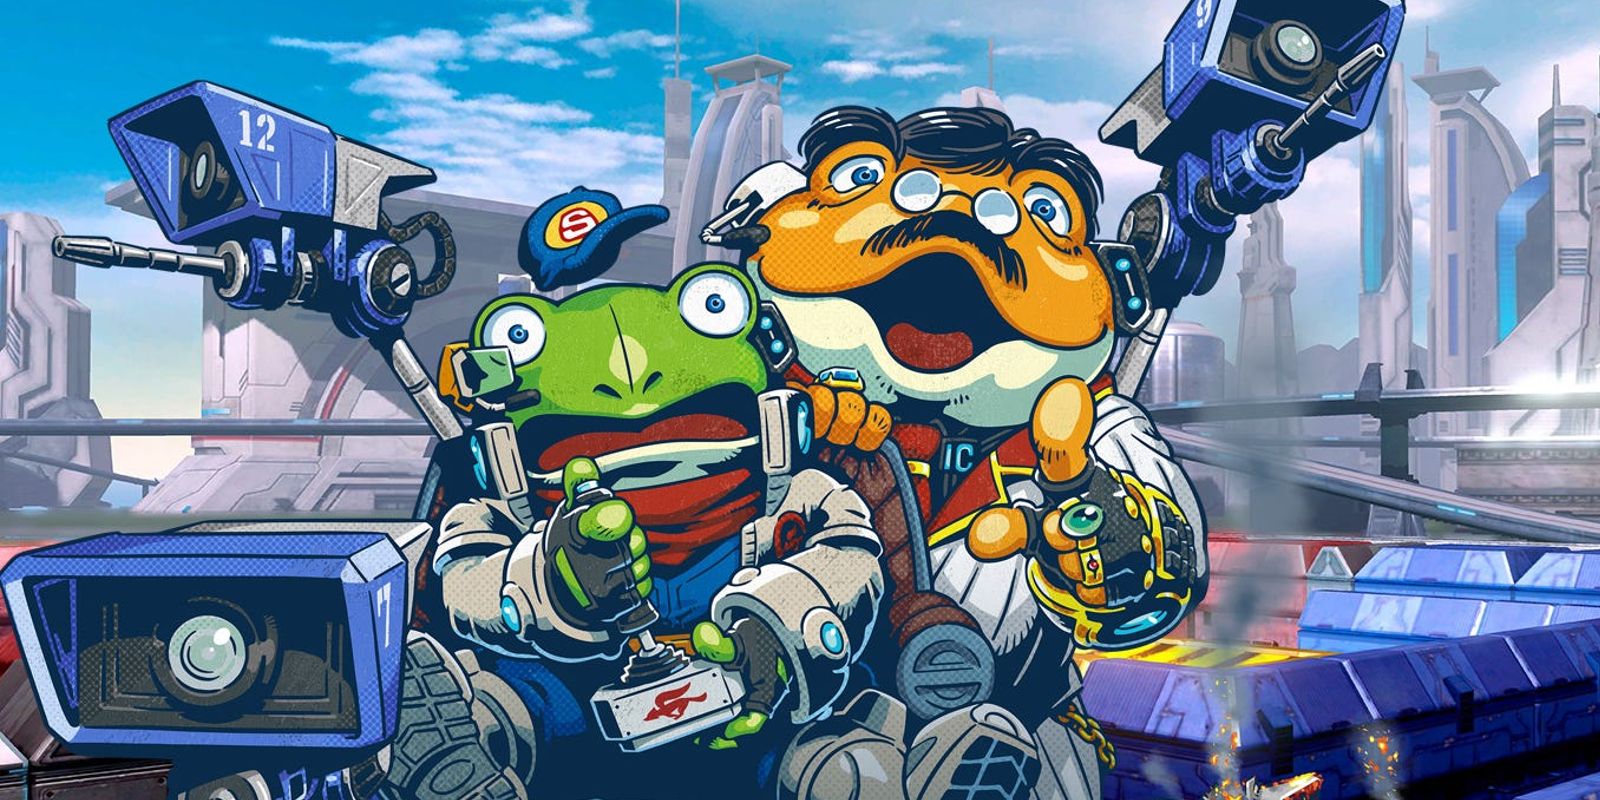 Slippy Toad at the control of the security cameras in Star Fox Guard